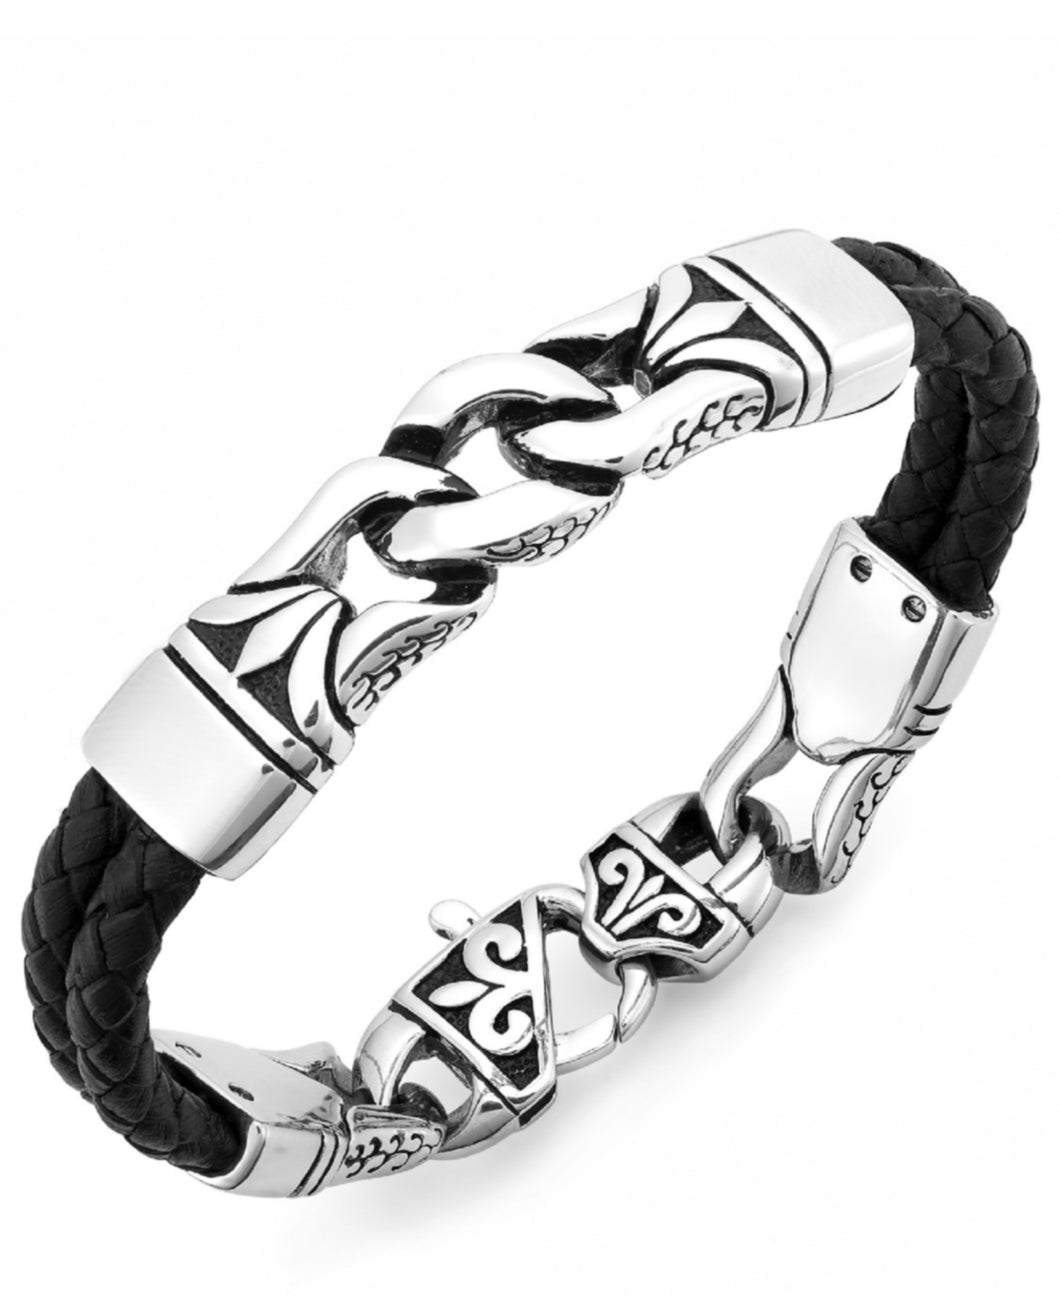 Men's Stainless Steel Link and Braided Leather Bracelet